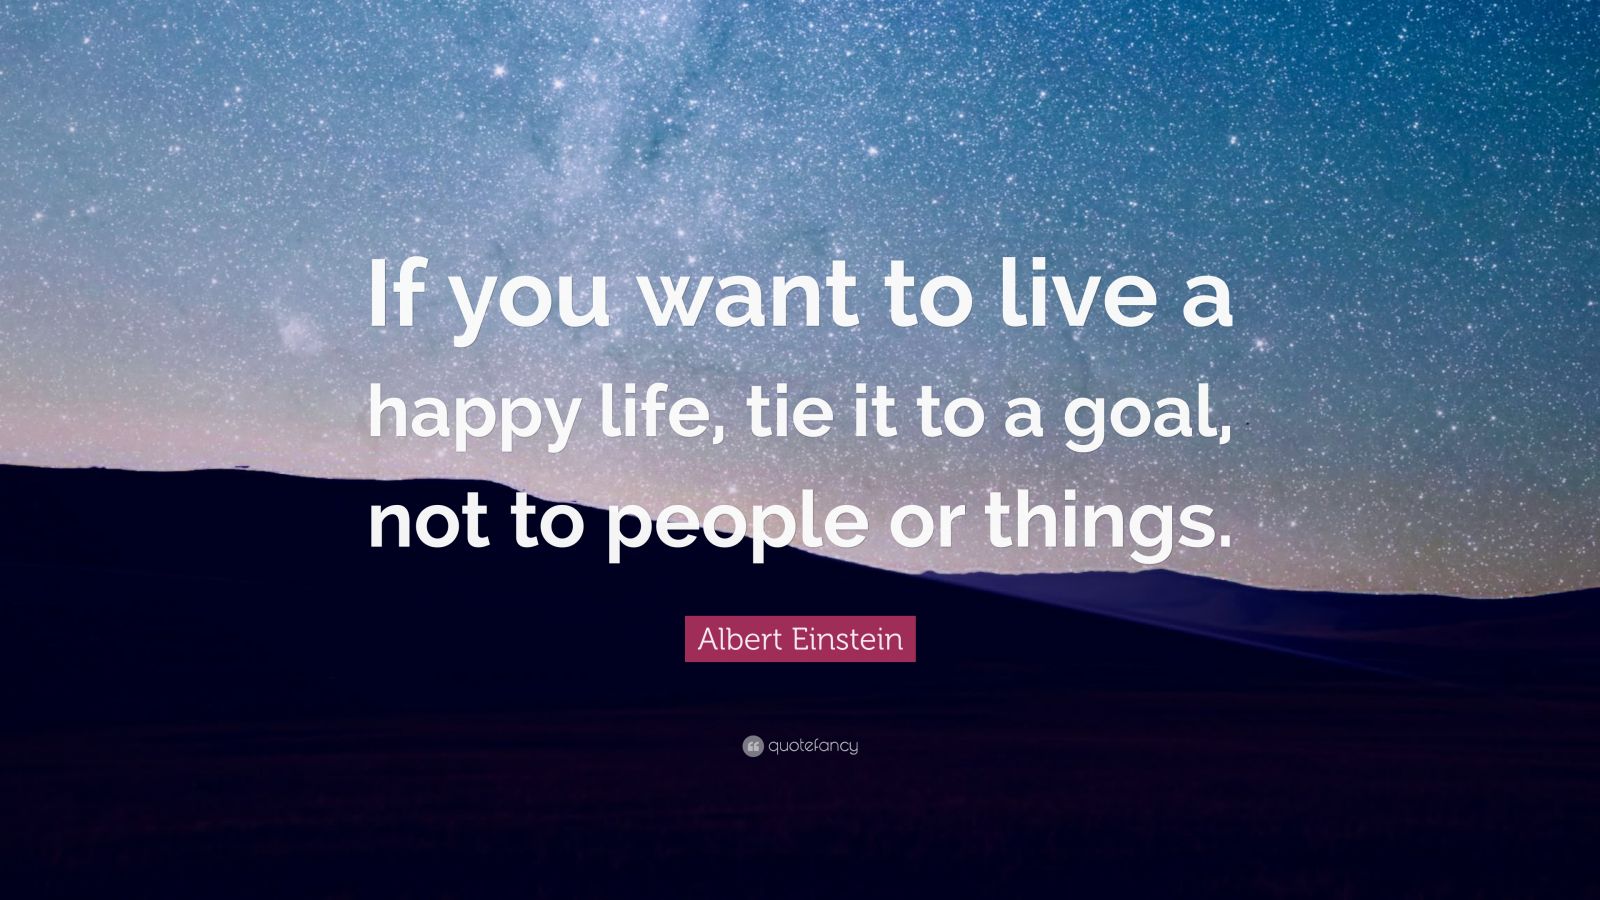 Albert Einstein Quote: “If you want to live a happy life, tie it to a goal,  not to people or things.”